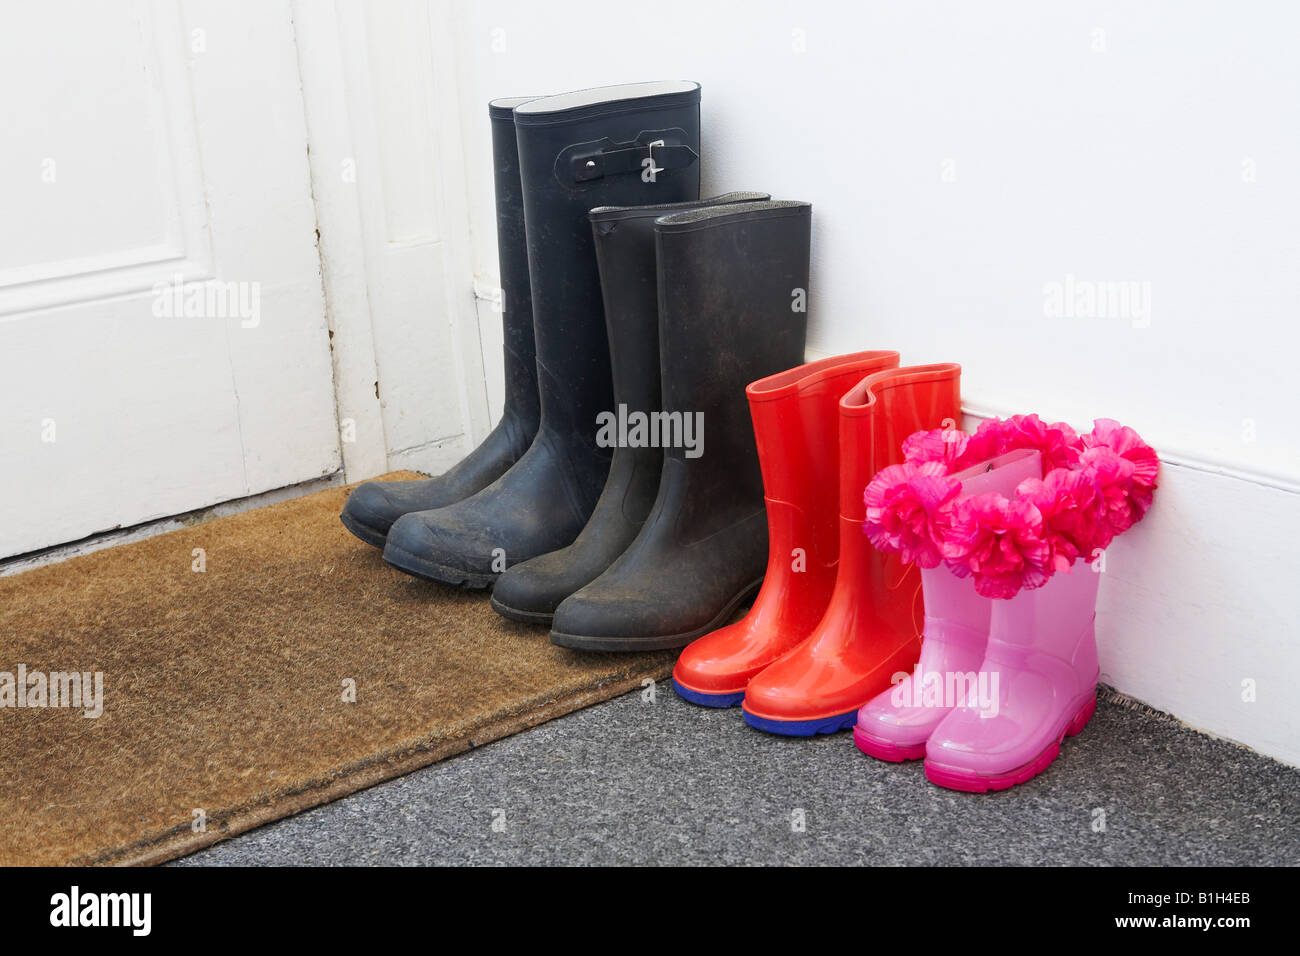 Rubber boots in hallway Stock Photo